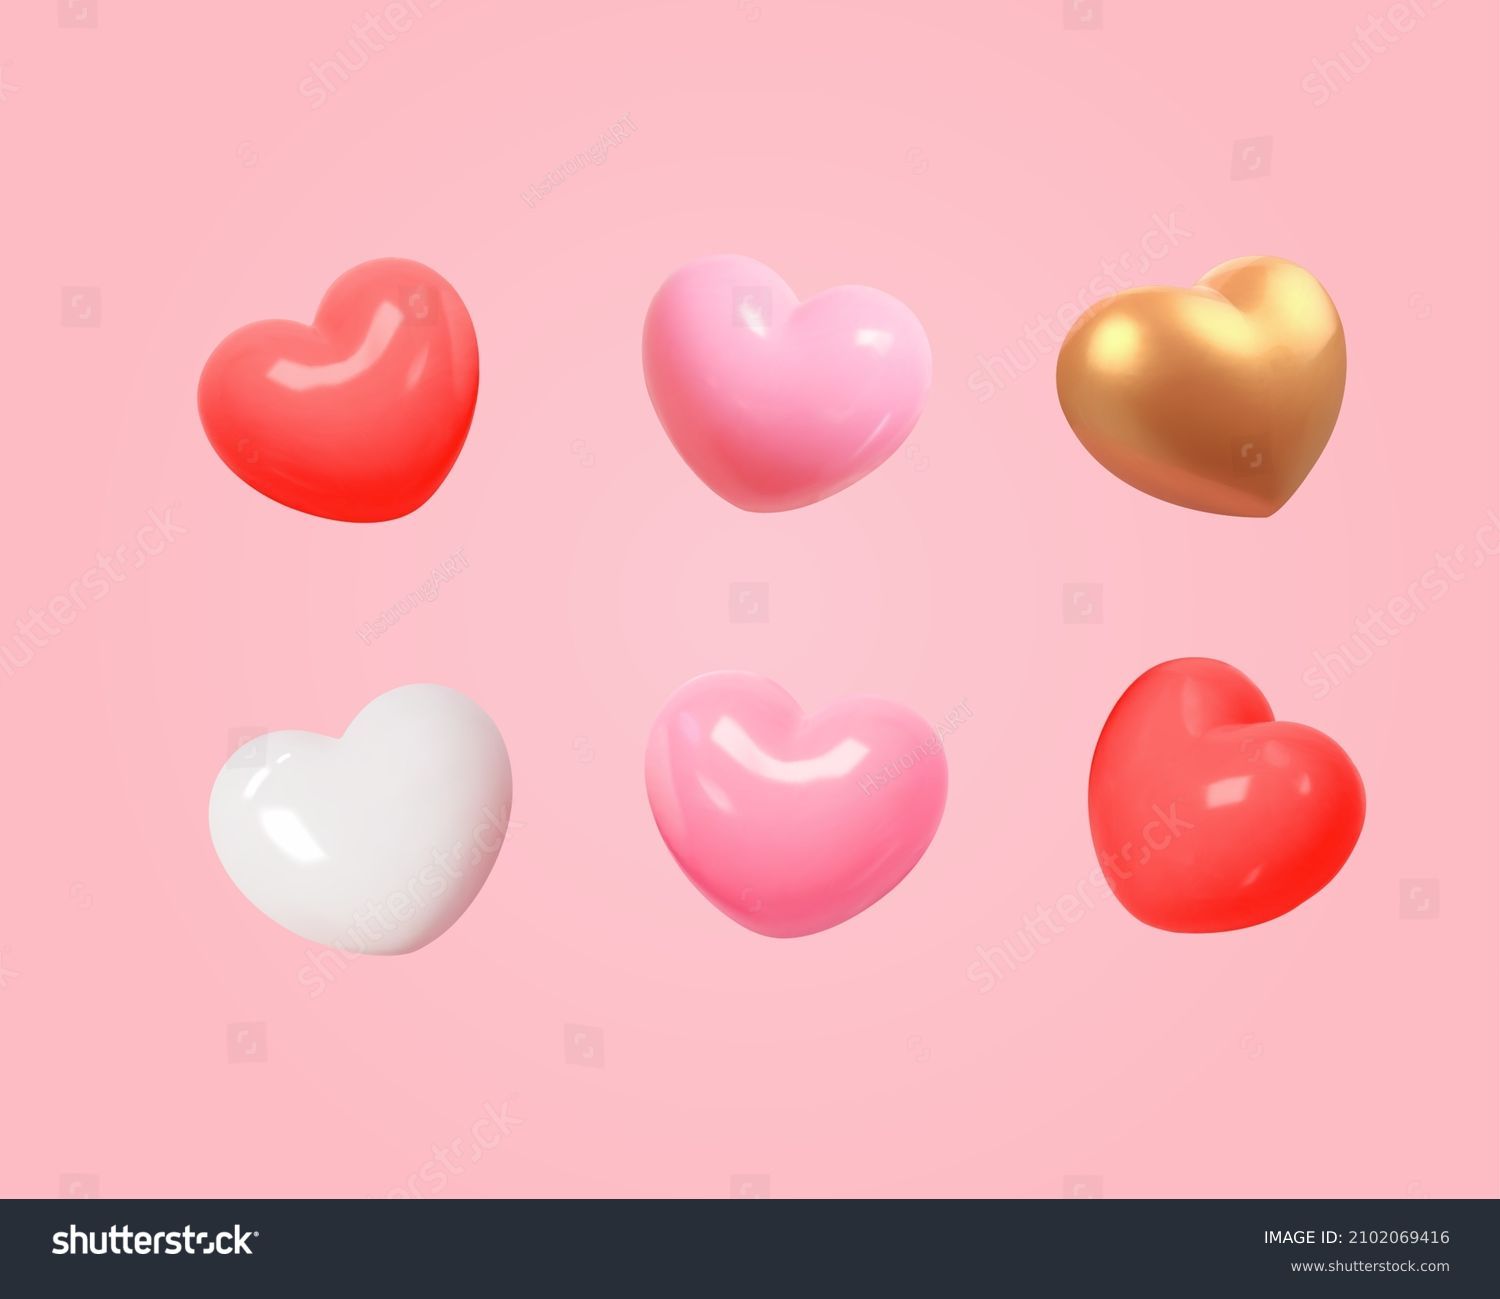 3d cartoon colorful heart shape toy collection, isolated on light pink background. Suitable for Valentine's Day and Mother's Day decoration. Stock Vector